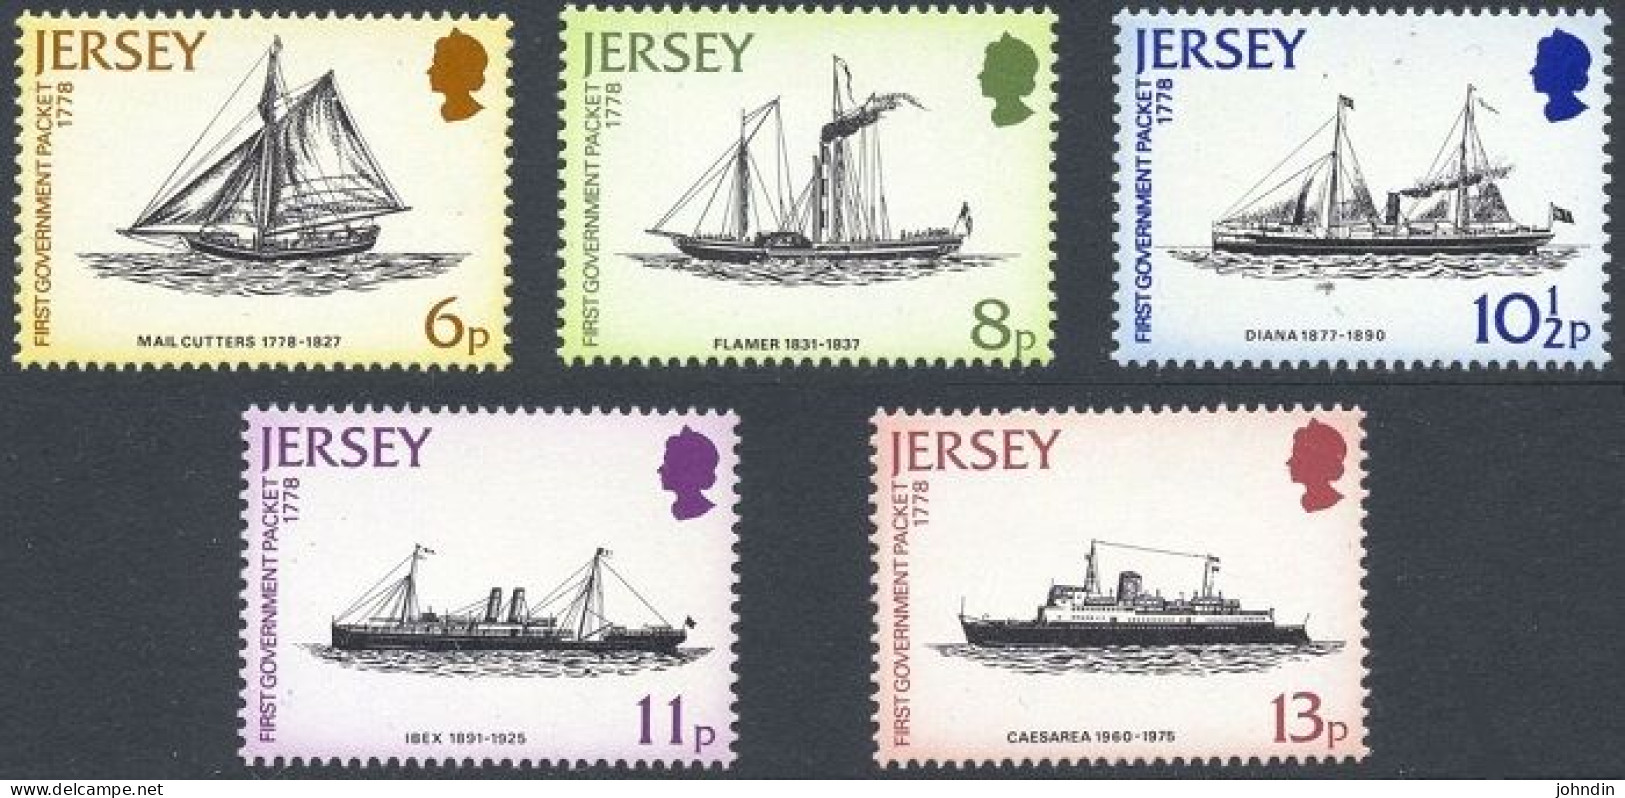 1978 Jersey Mail Packet Service Ships Set Of 5 Stamps SG 197 To 201 UM/MNH - Jersey